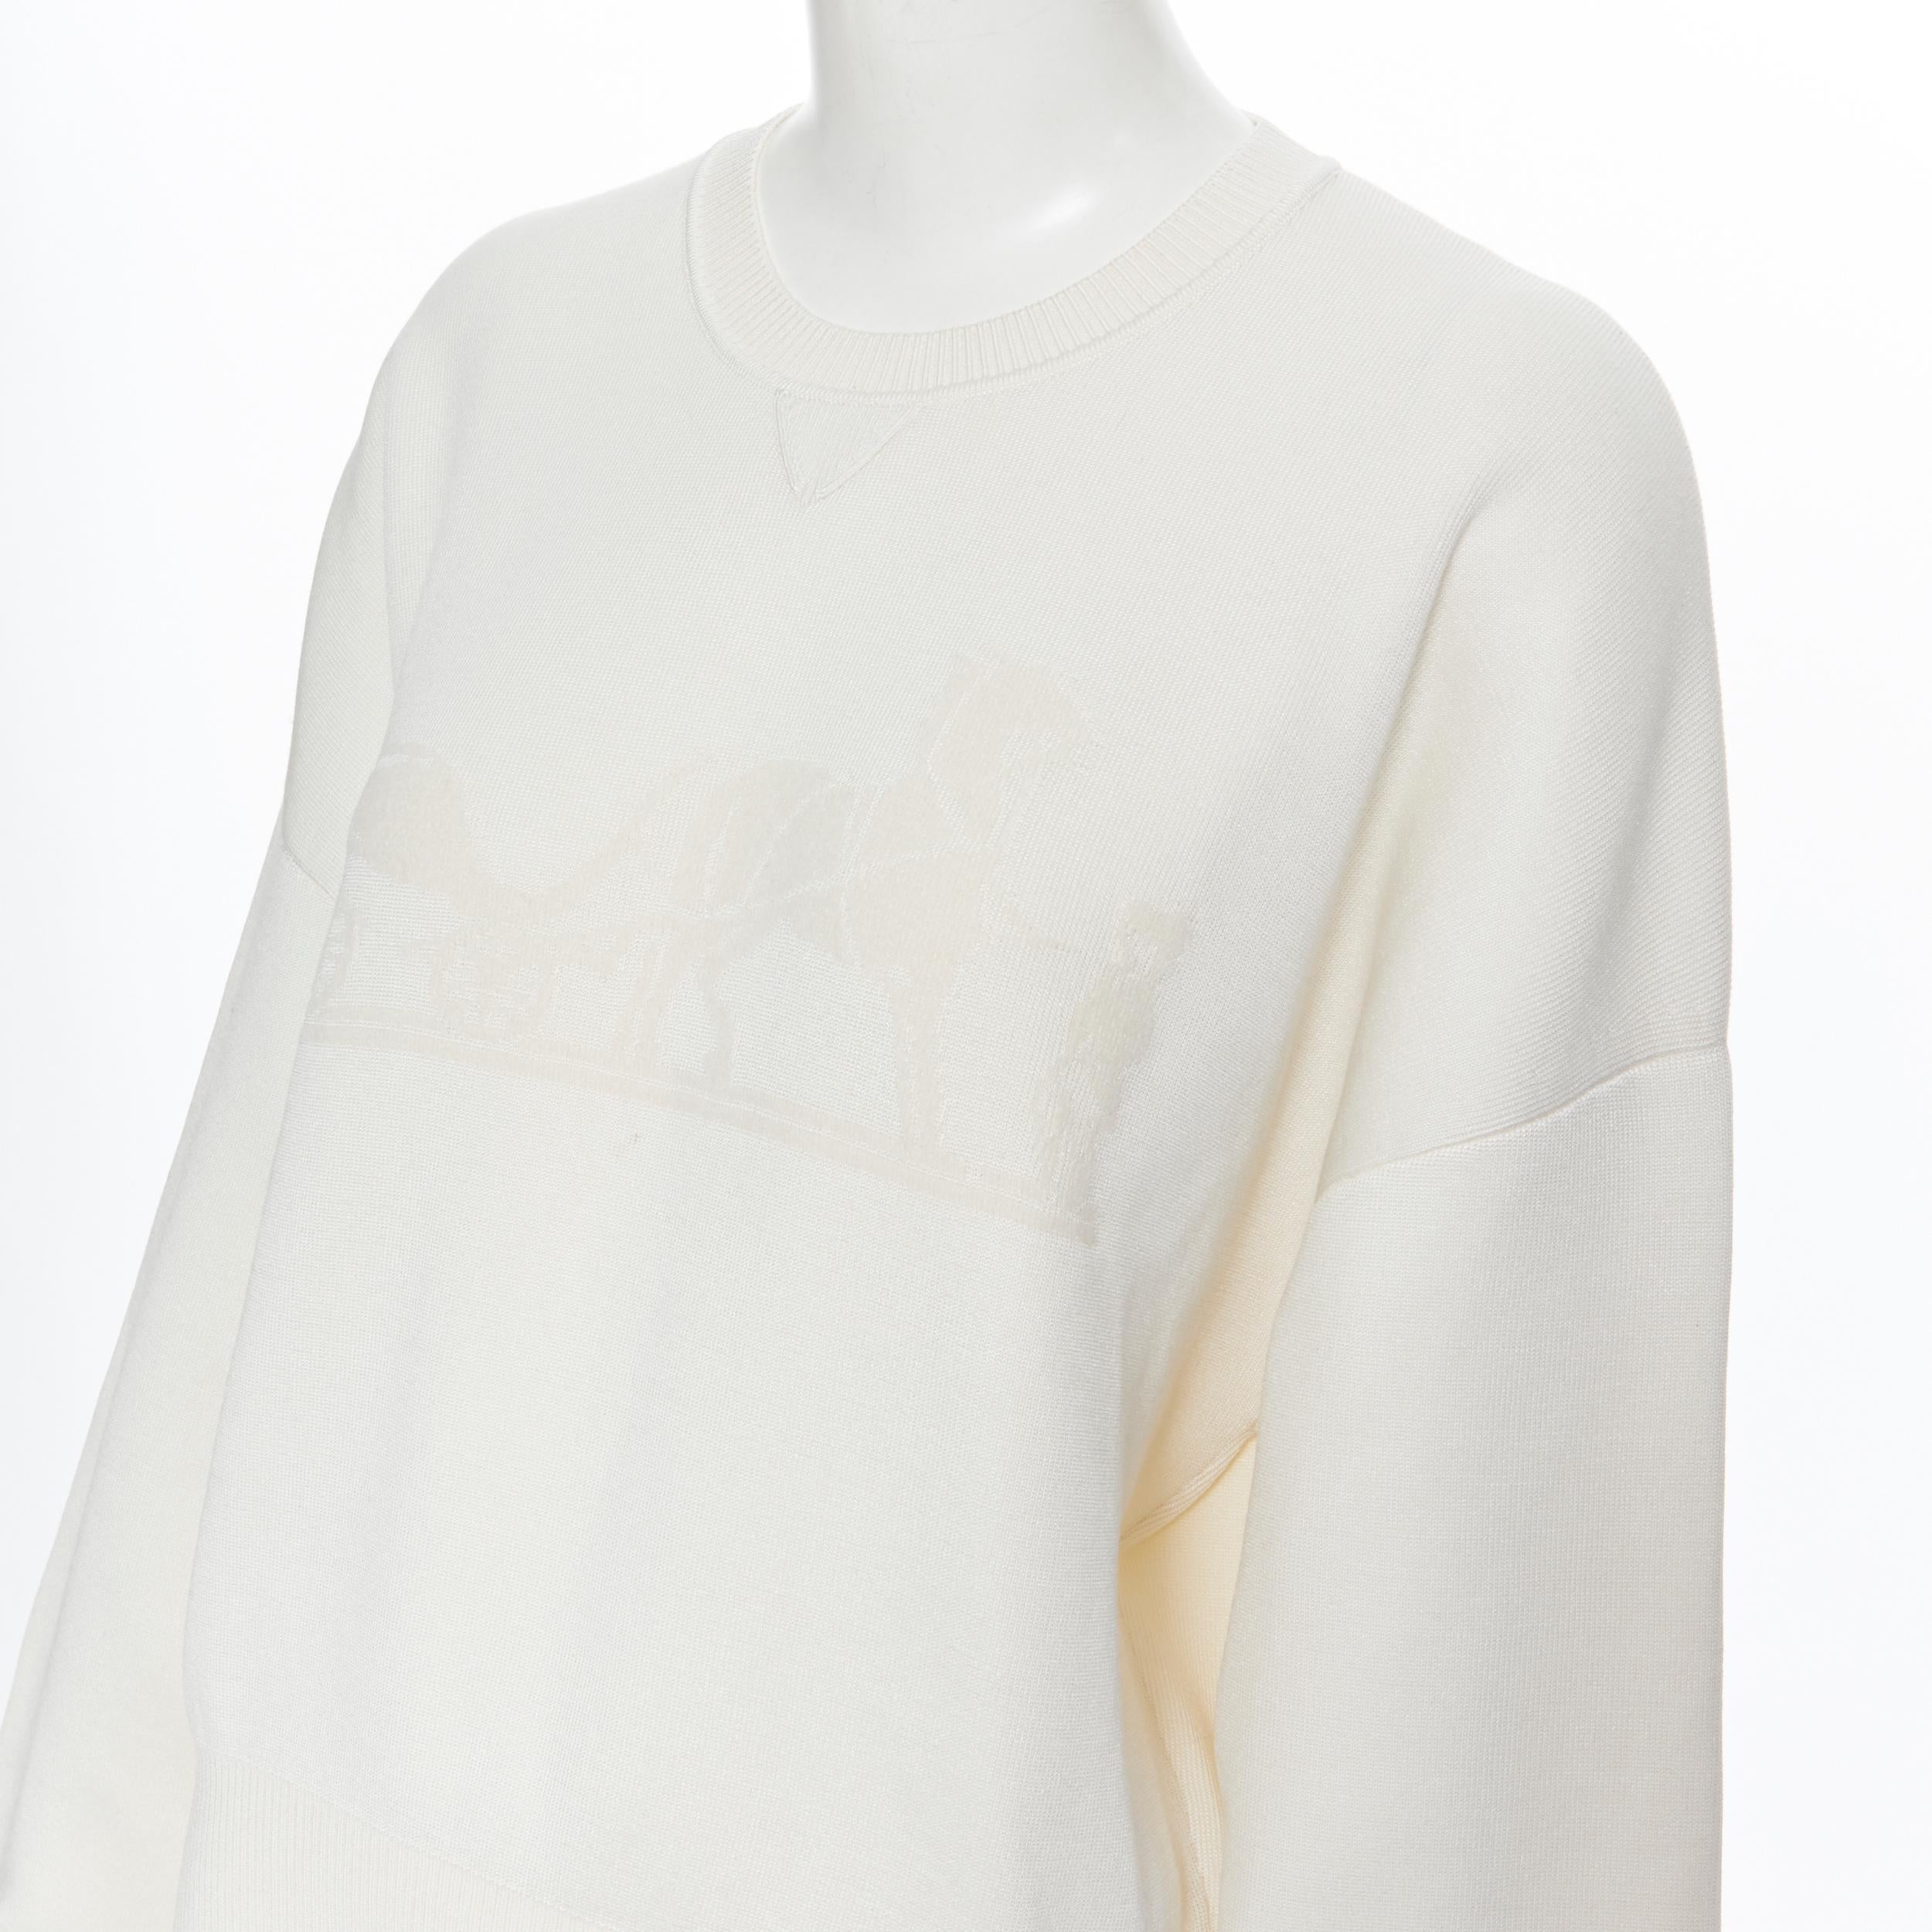 new HERMES ivory cream cashmere silk blend logo intarsia short sweater FR44 XL 
Reference: VACN/A00006 
Brand: Hermes 
Material: Cashmere 
Color: Beige 
Pattern: Solid 
Extra Detail: Signature logo horse carriage intarsia on front. Short fit. 
Made